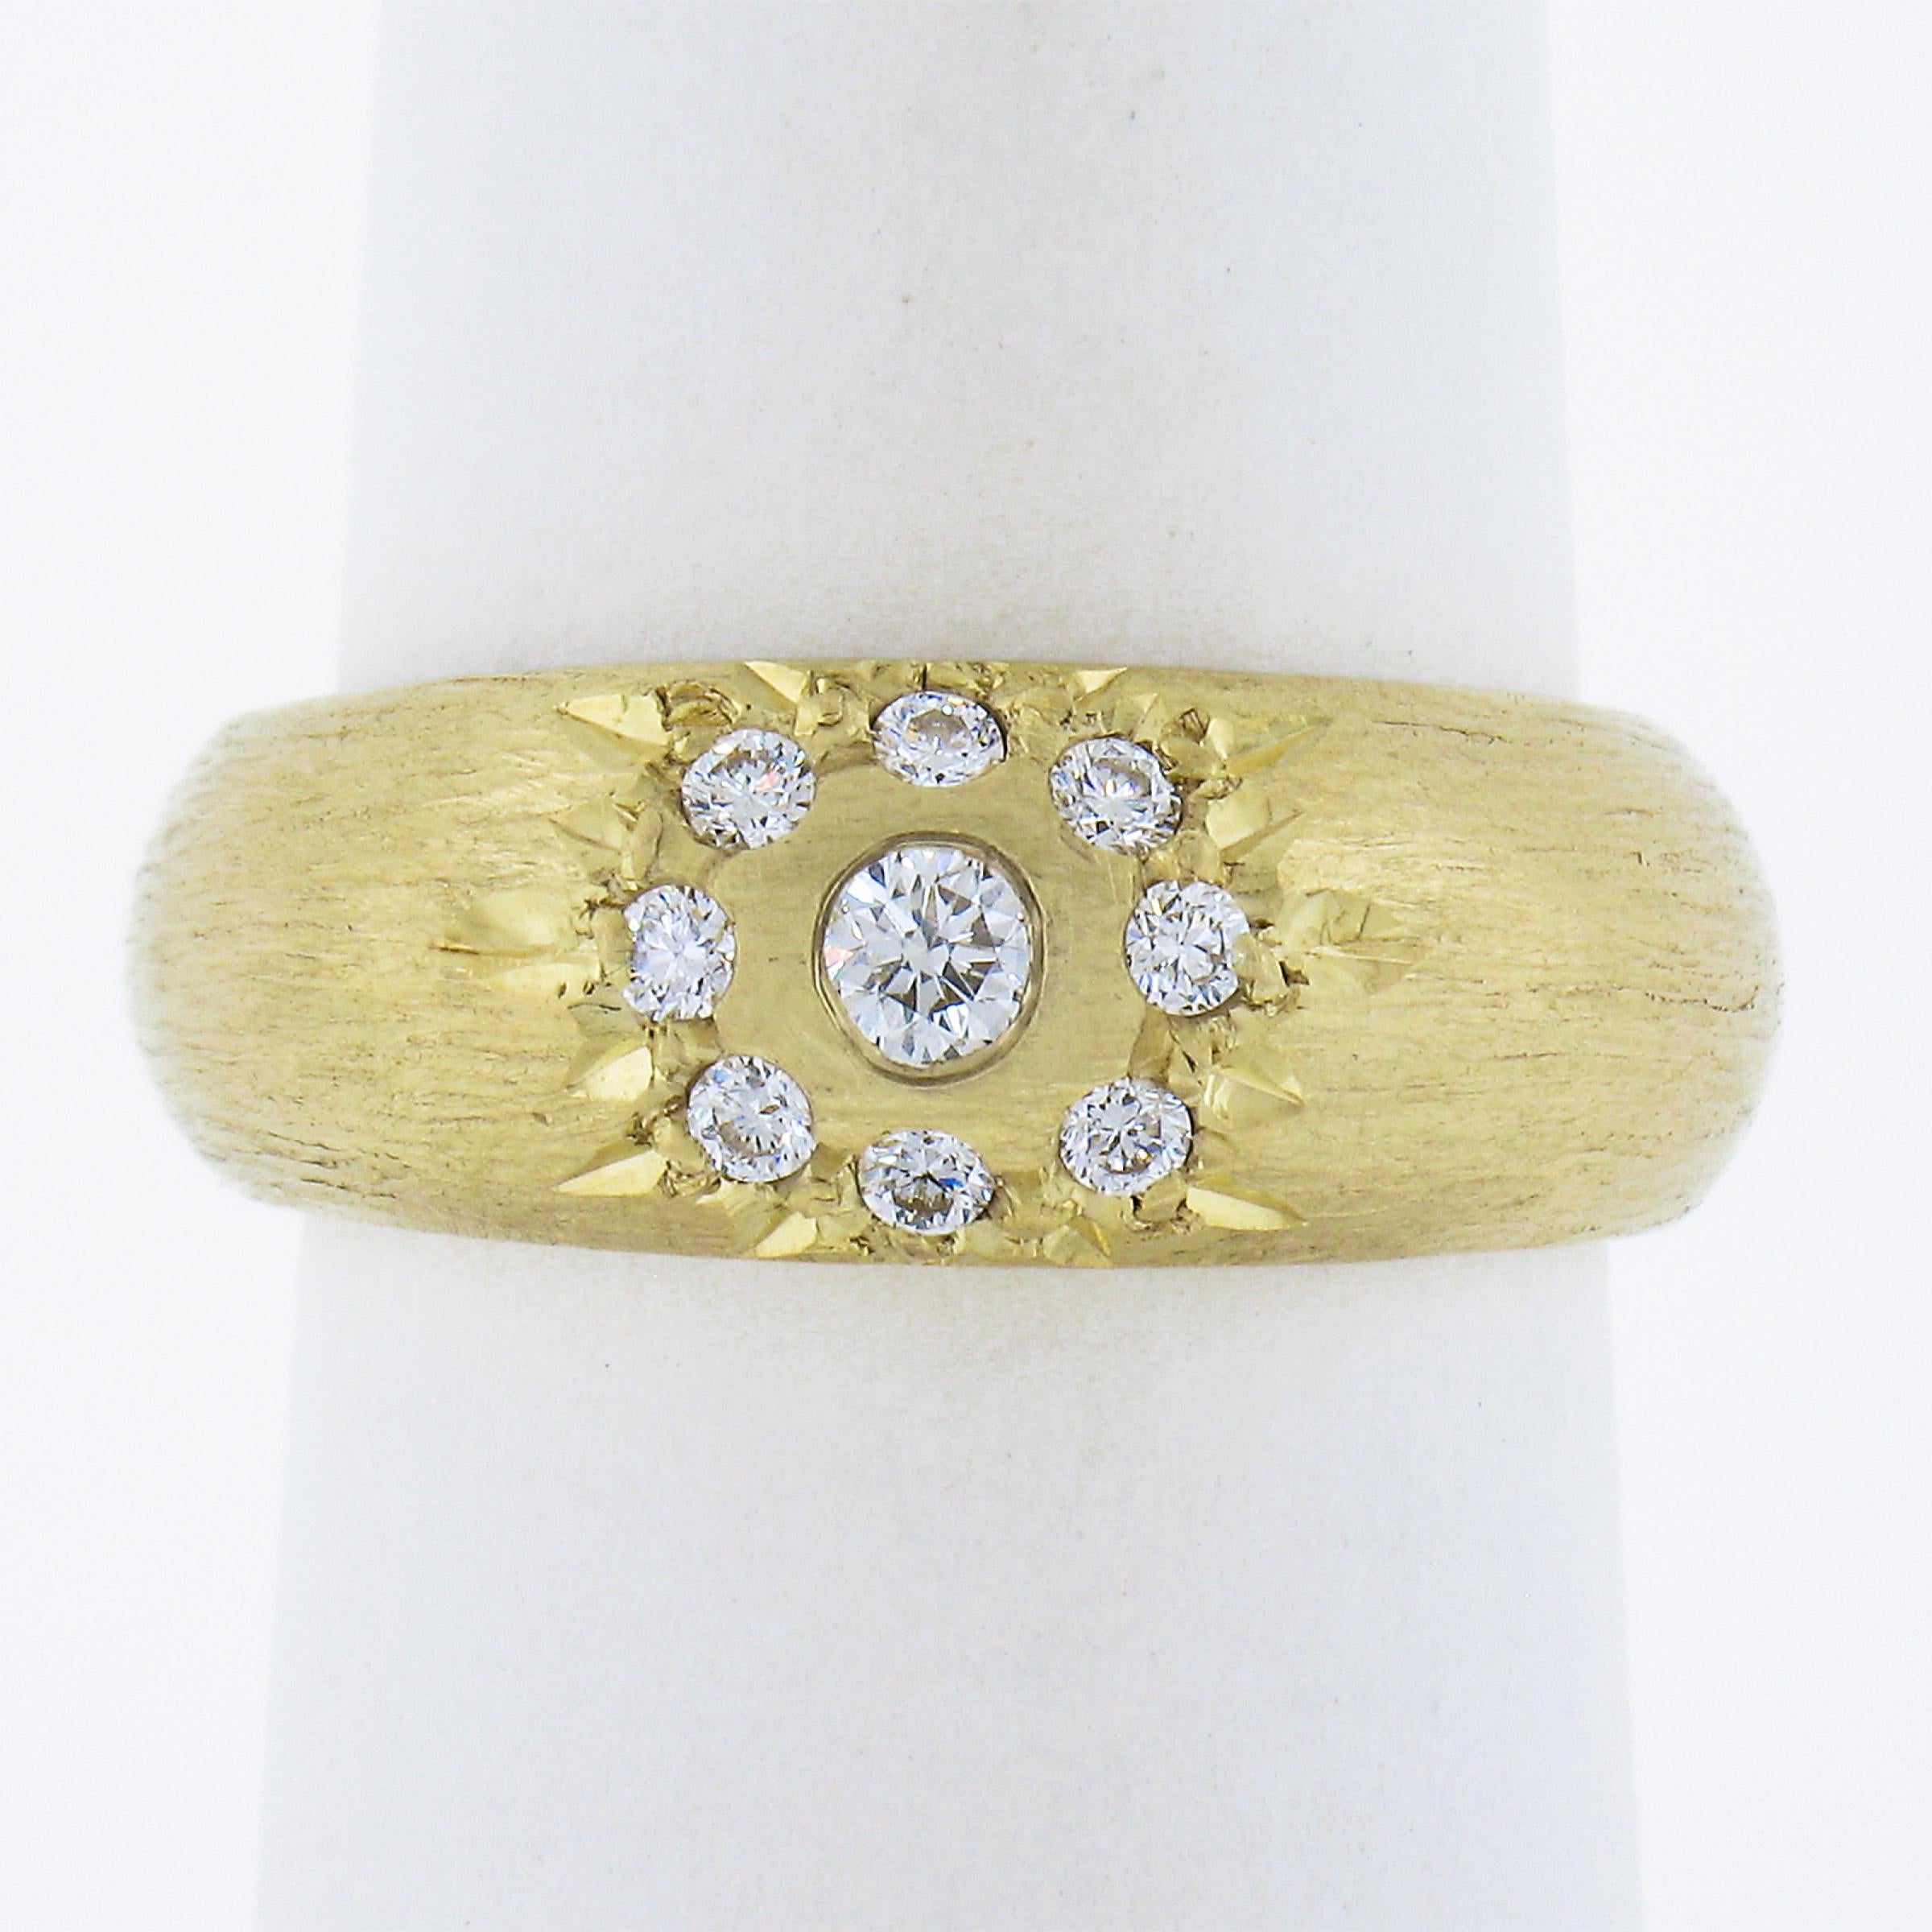 --Stone(s):--
(10) Natural Genuine Diamonds - Round Brilliant Cut - Star Pave Set - F/G Color - VS1/VS2 Clarity
Total Carat Weight:	0.27 (approx.)

Material: Solid 14k Yellow Gold 
Weight: 6.88 Grams
Ring Size: 6.0 (Fitted on a finger. we can NOT